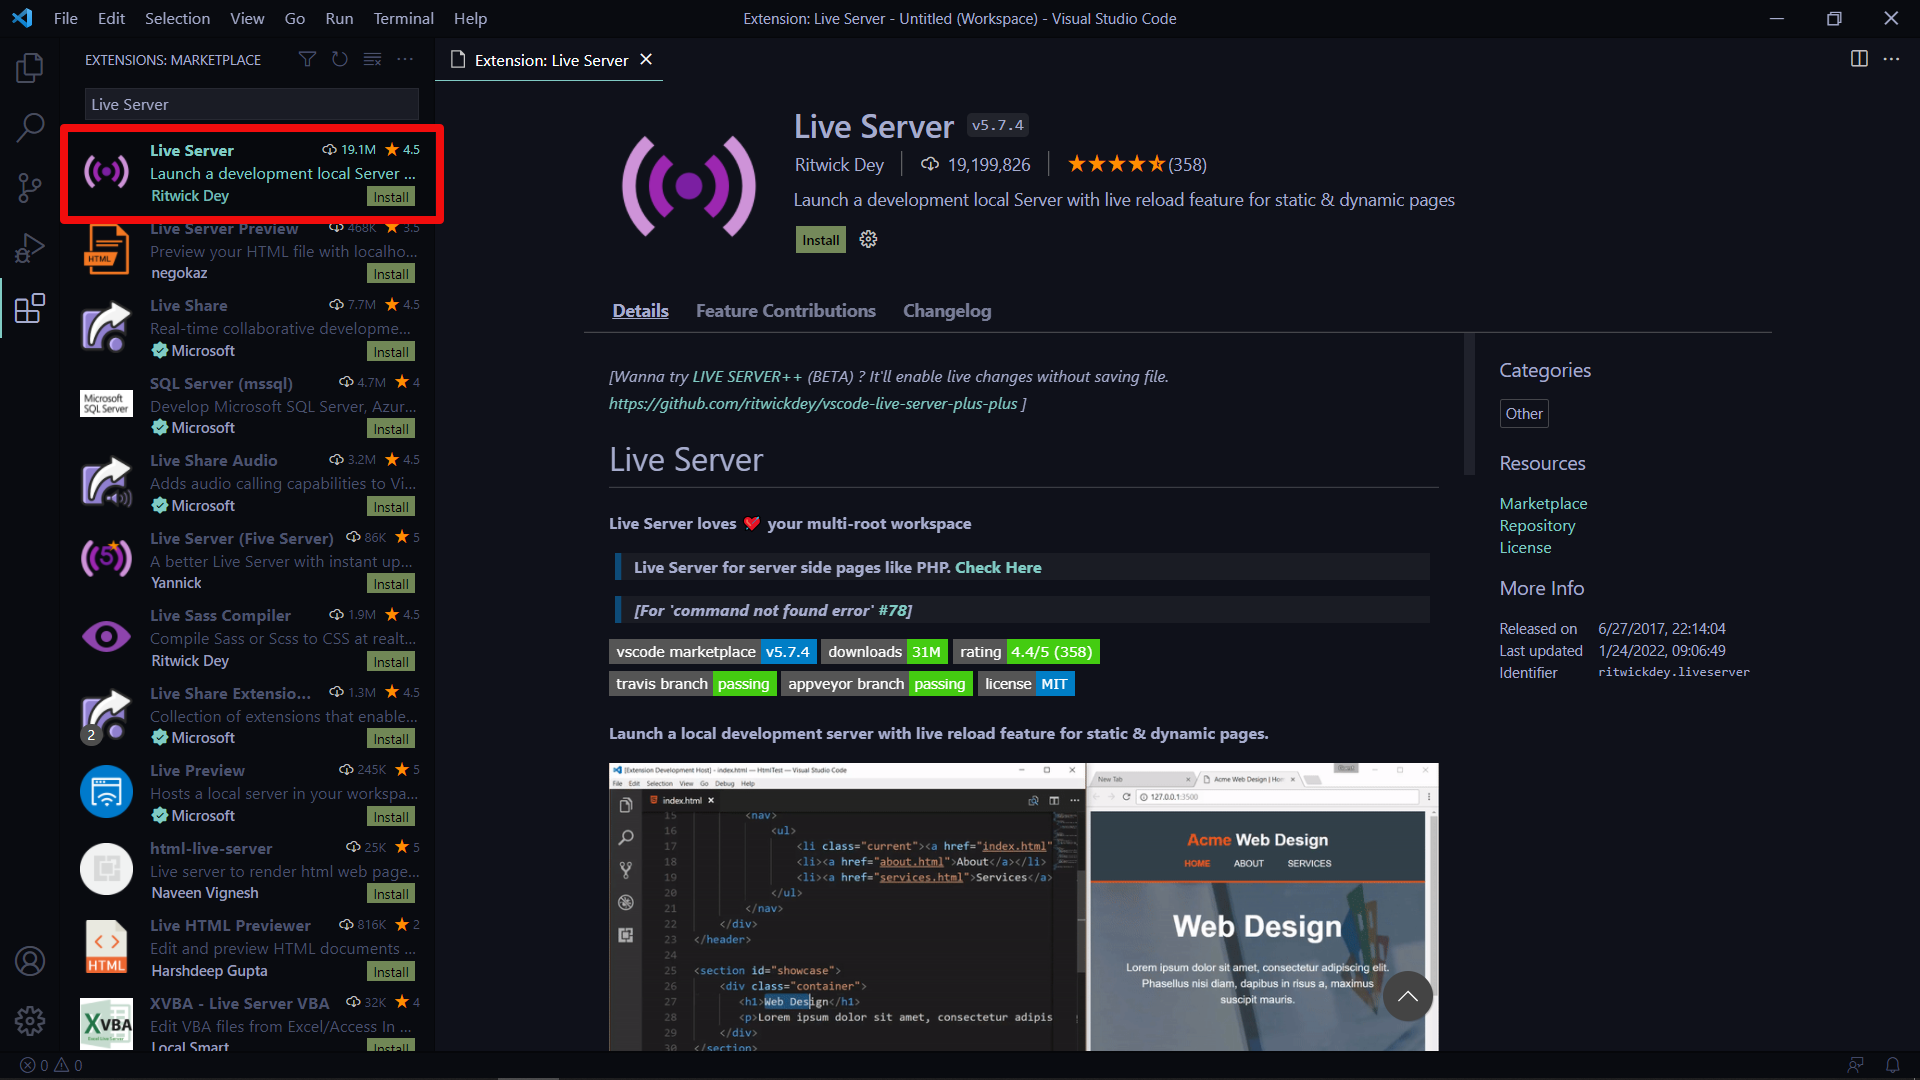 Install the Live Server by Ritwick Dey